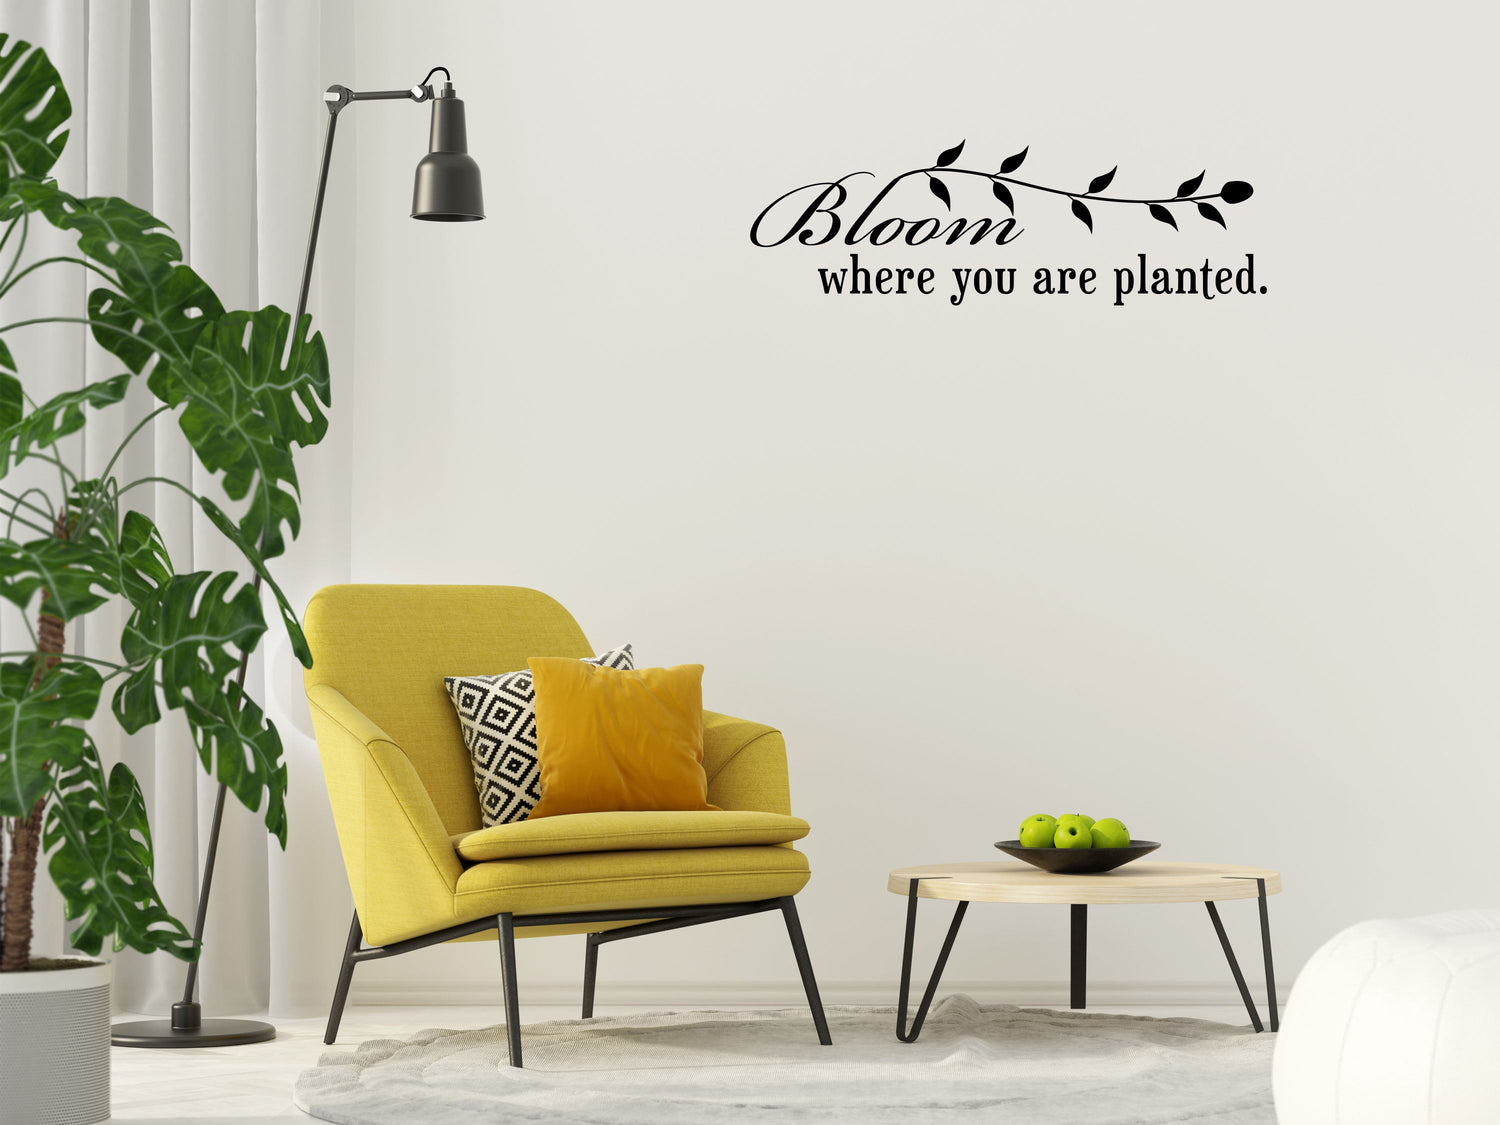 Bloom Where You Are Planted Wall Stickers - Inspirational Wall Decals Vinyl Wall Decal Inspirational Wall Signs 